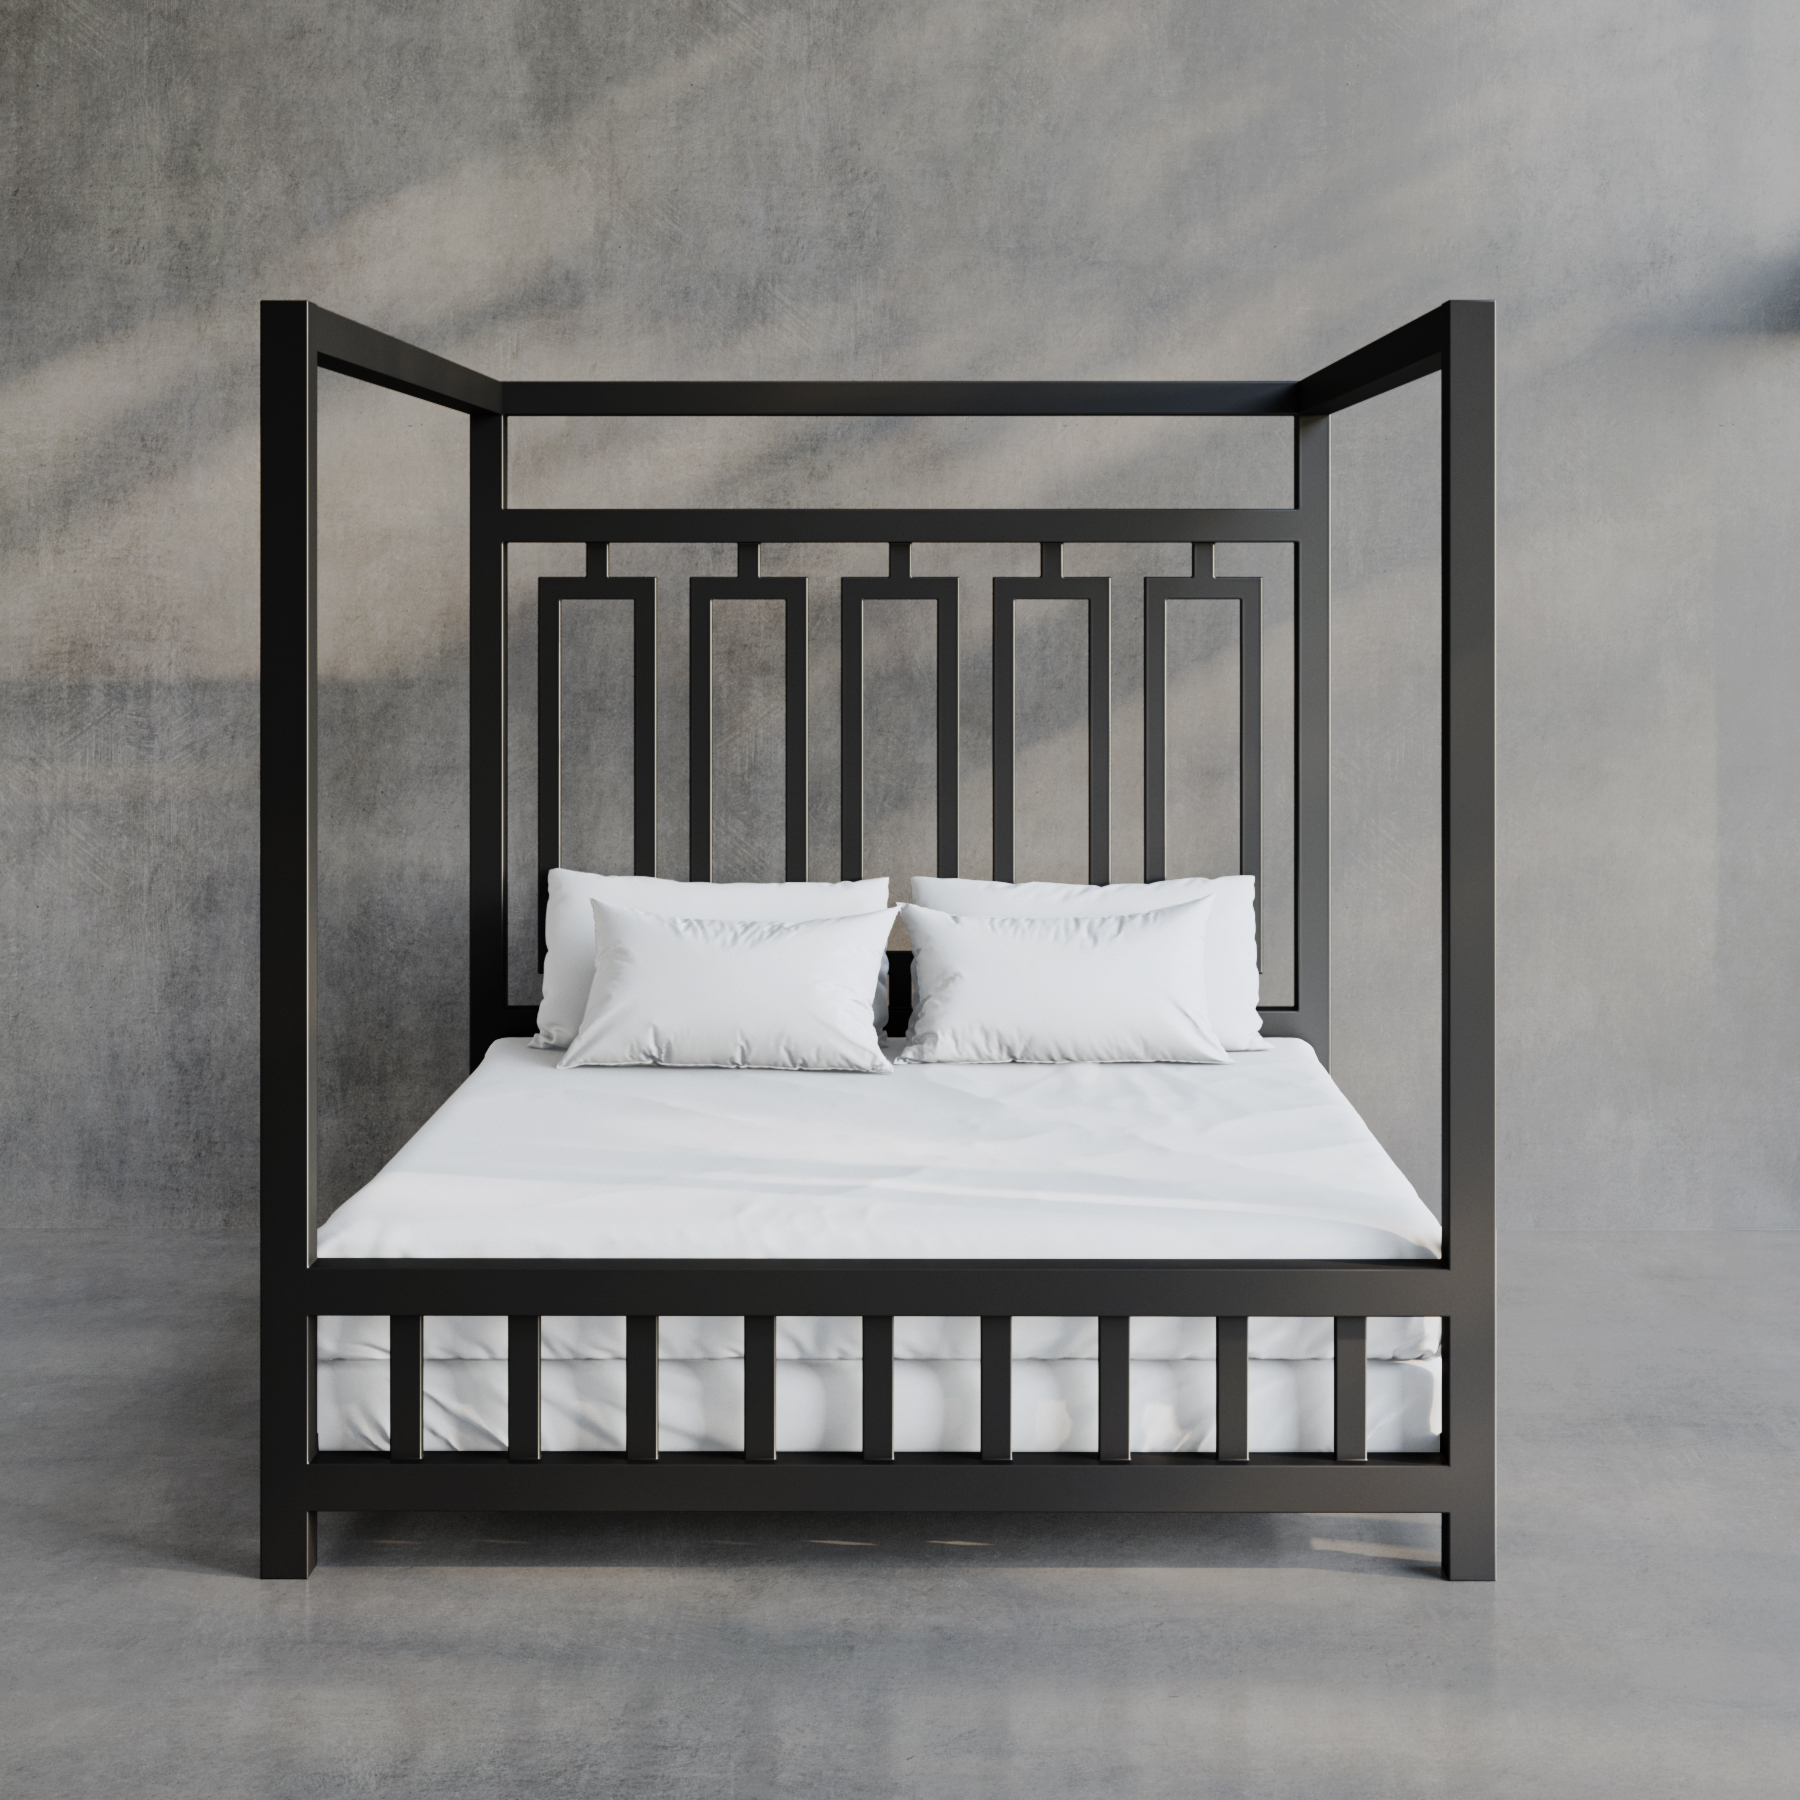 Product image of a White Sheets of San Francisco Waterproof, wax proof and fluidproof bed sheet and 4 pillows with matching white waterproof covers. Displayed on a black metal four poster dungeon bed set against grey polished concrete floor and walls with black frames full height glazing giving a view of grass and shrub s in the garden